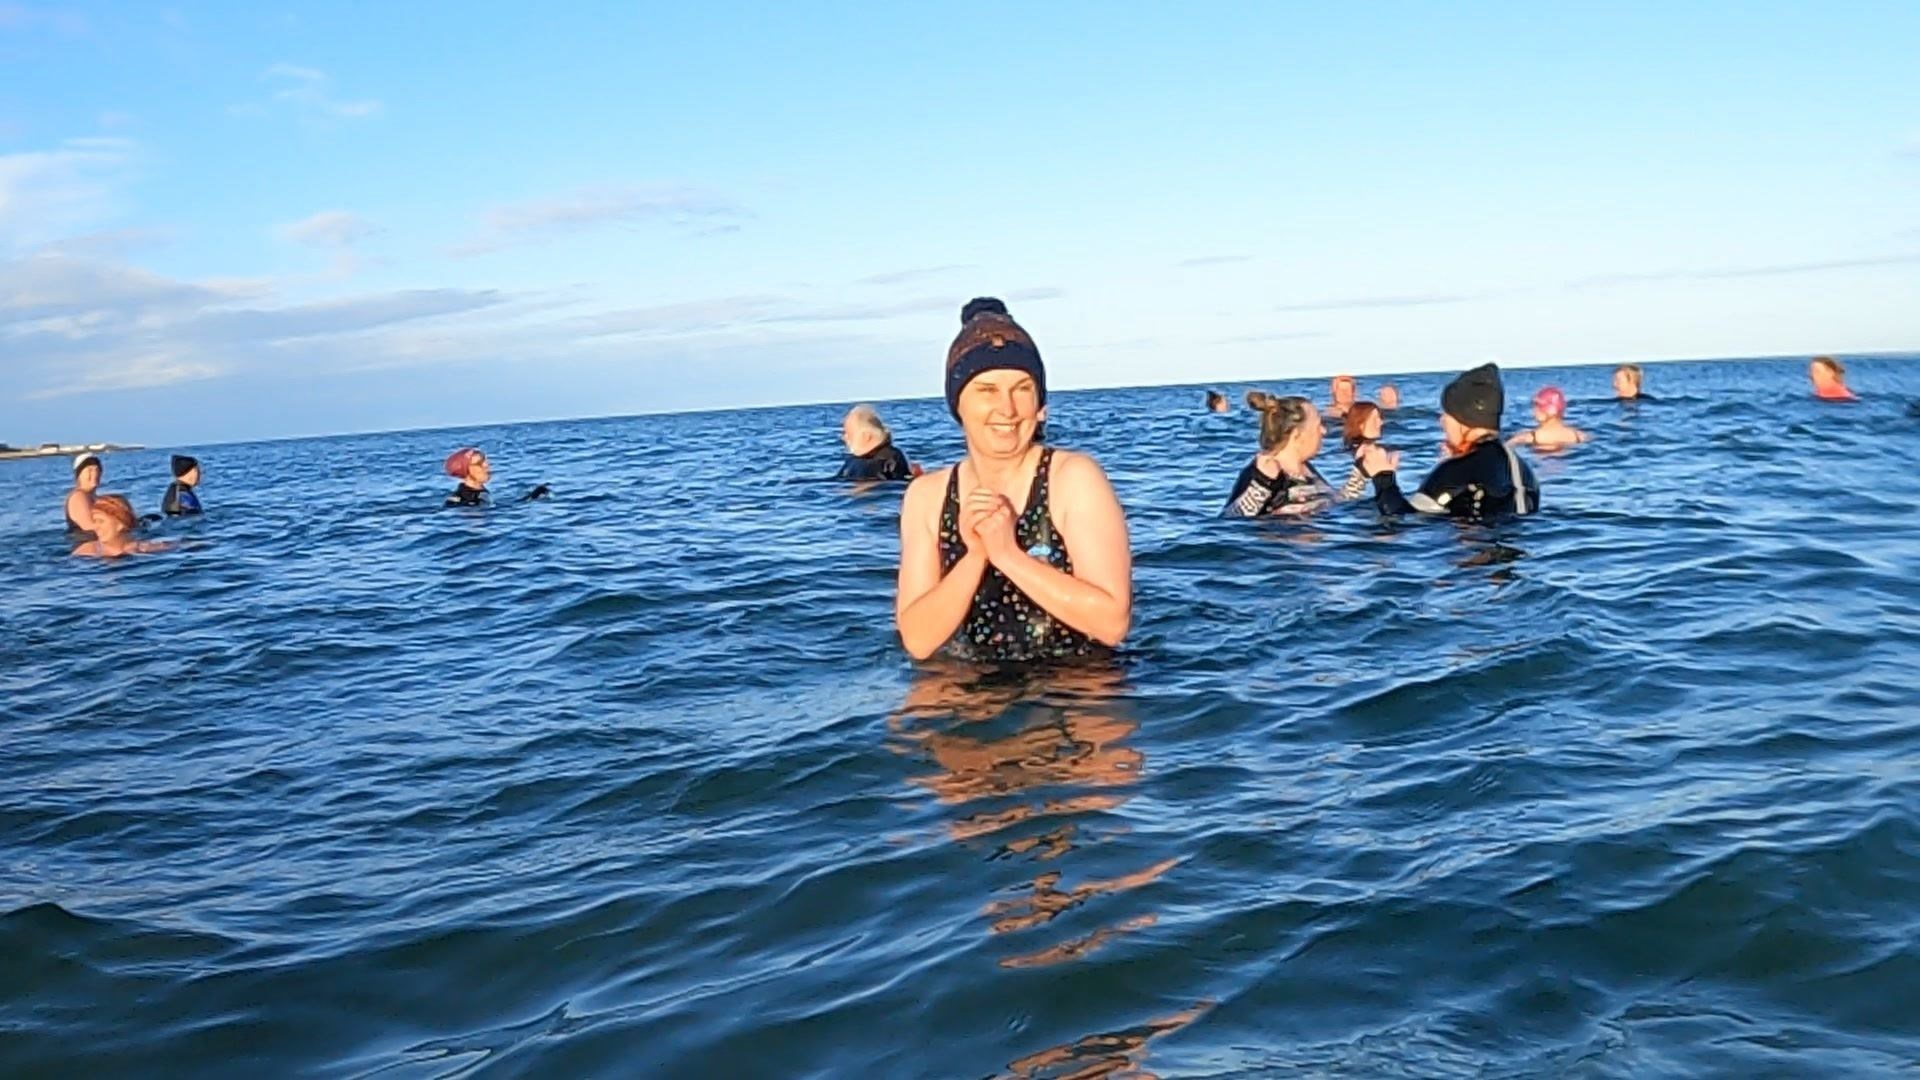 Cold? More than 60 members of the group took part in the swim.